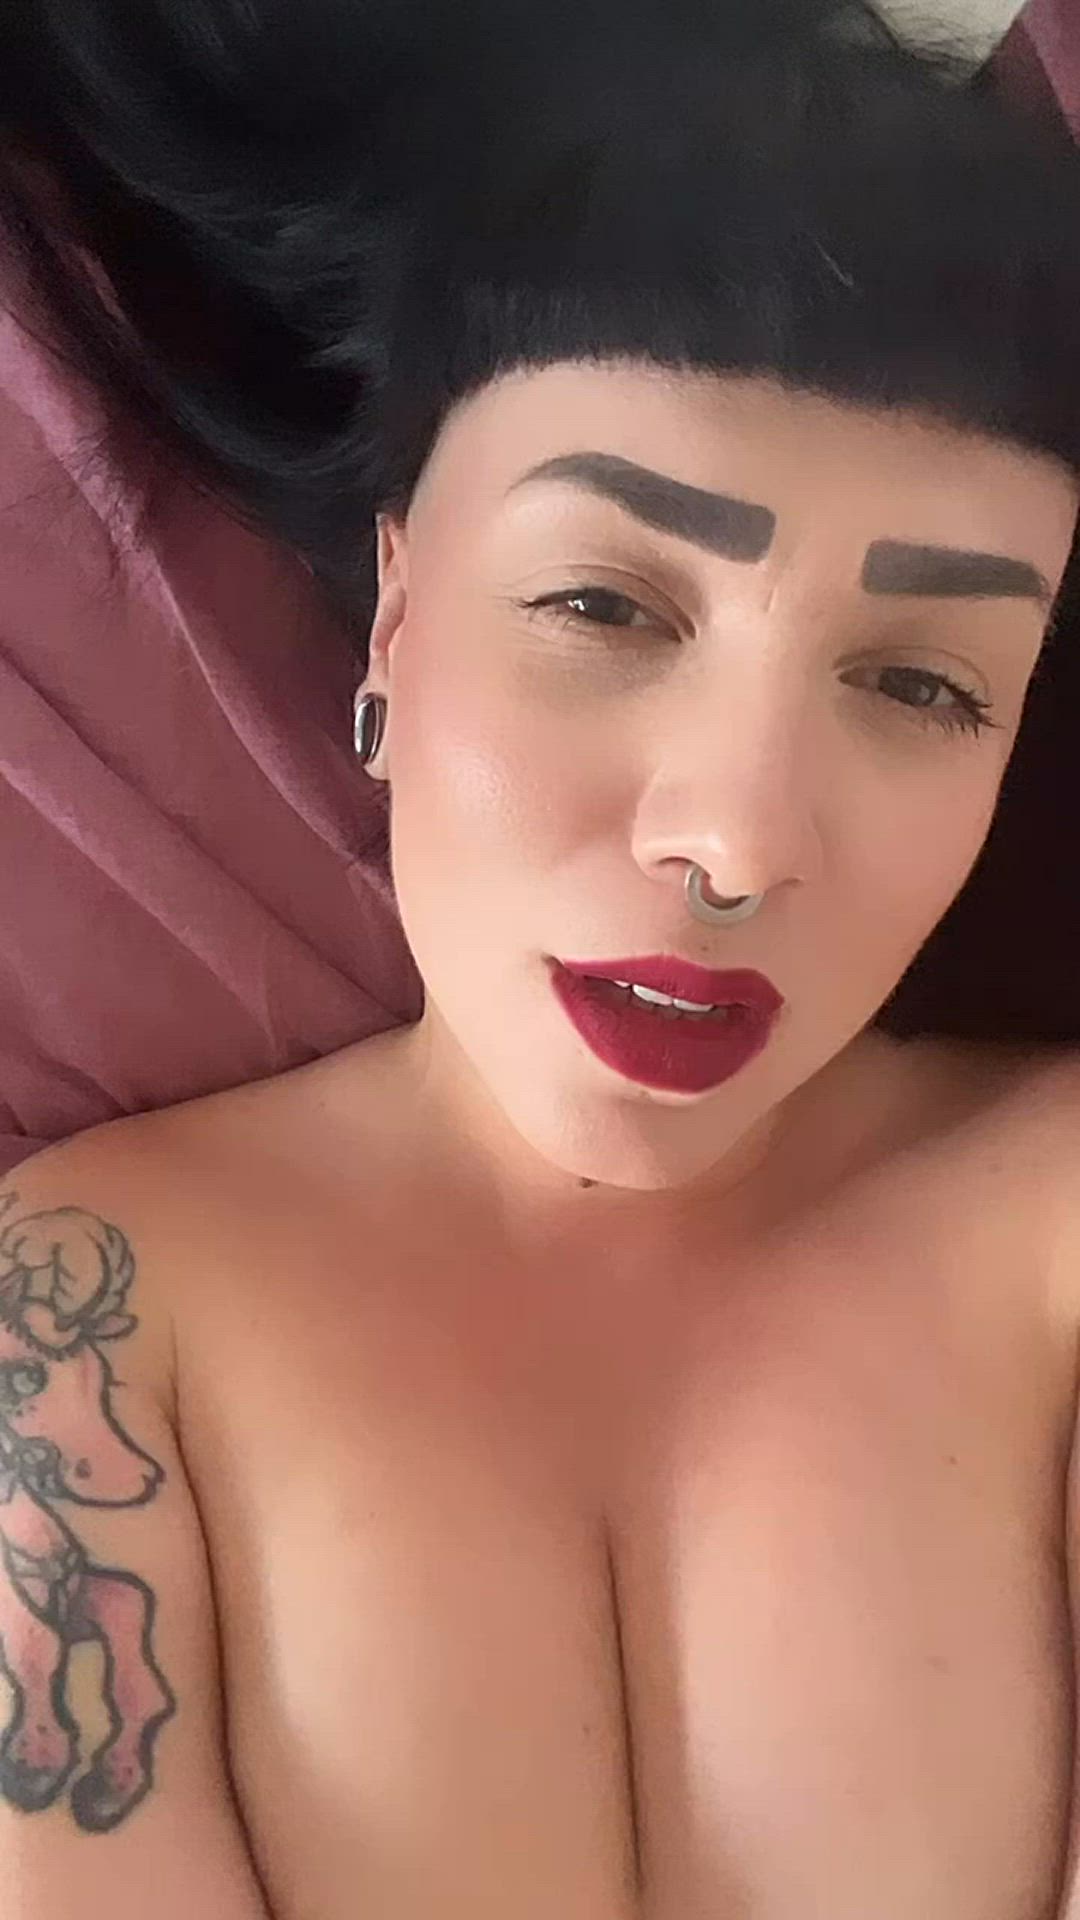 Goth porn video with onlyfans model bettybrat <strong>@bettybrat</strong>